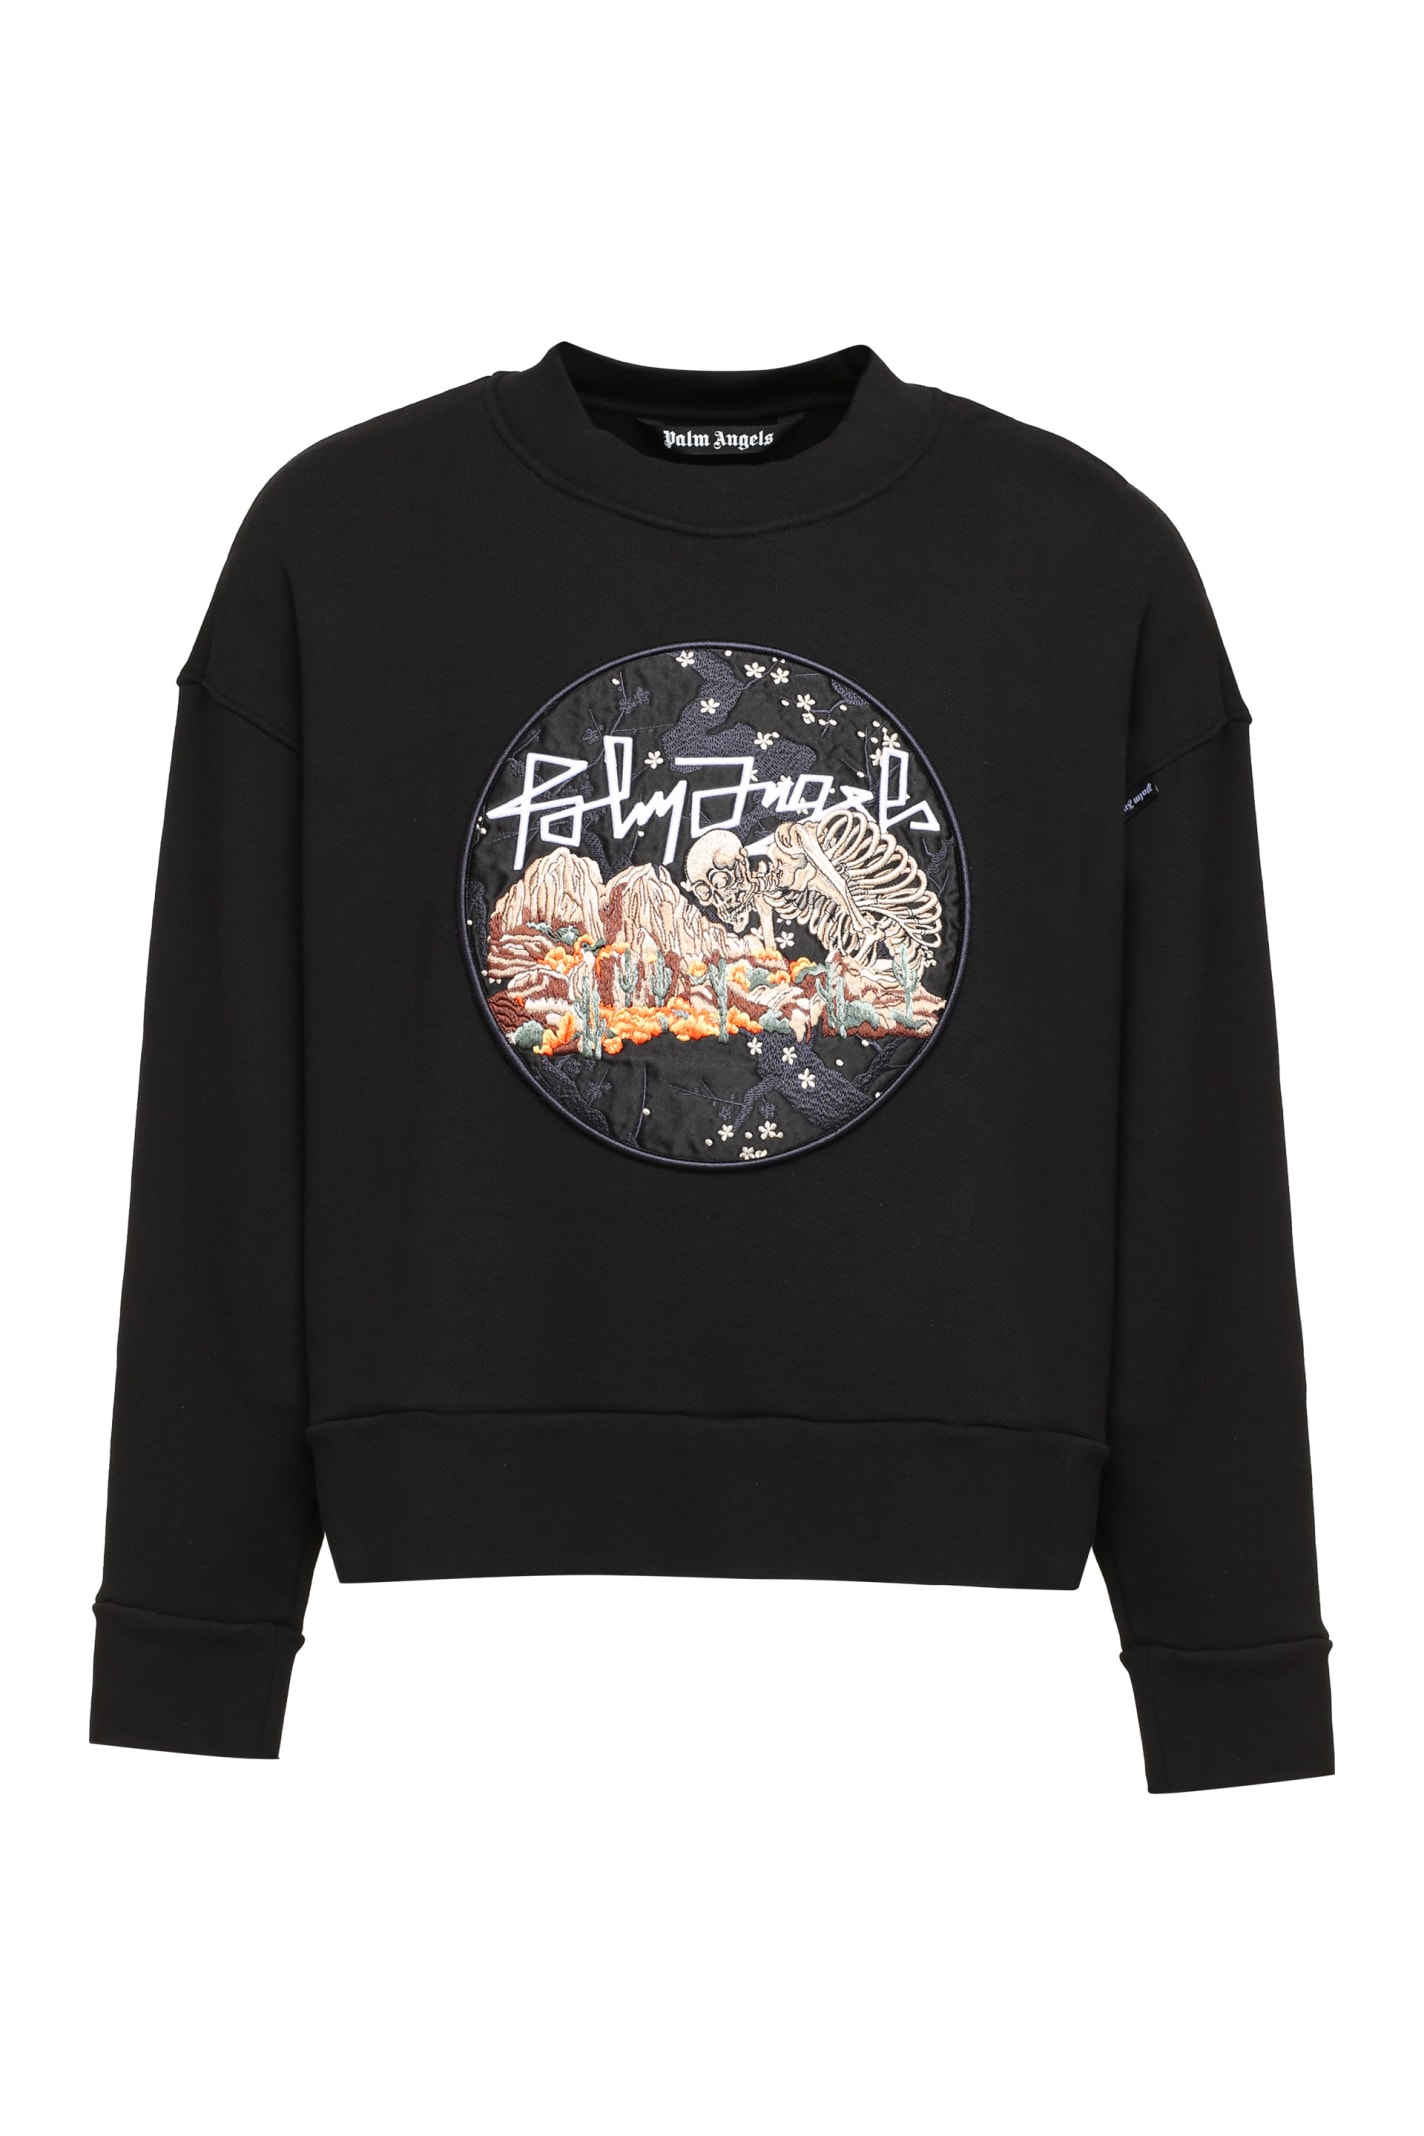 Palm Angels Embroidered Patch Oversize Sweatshirt